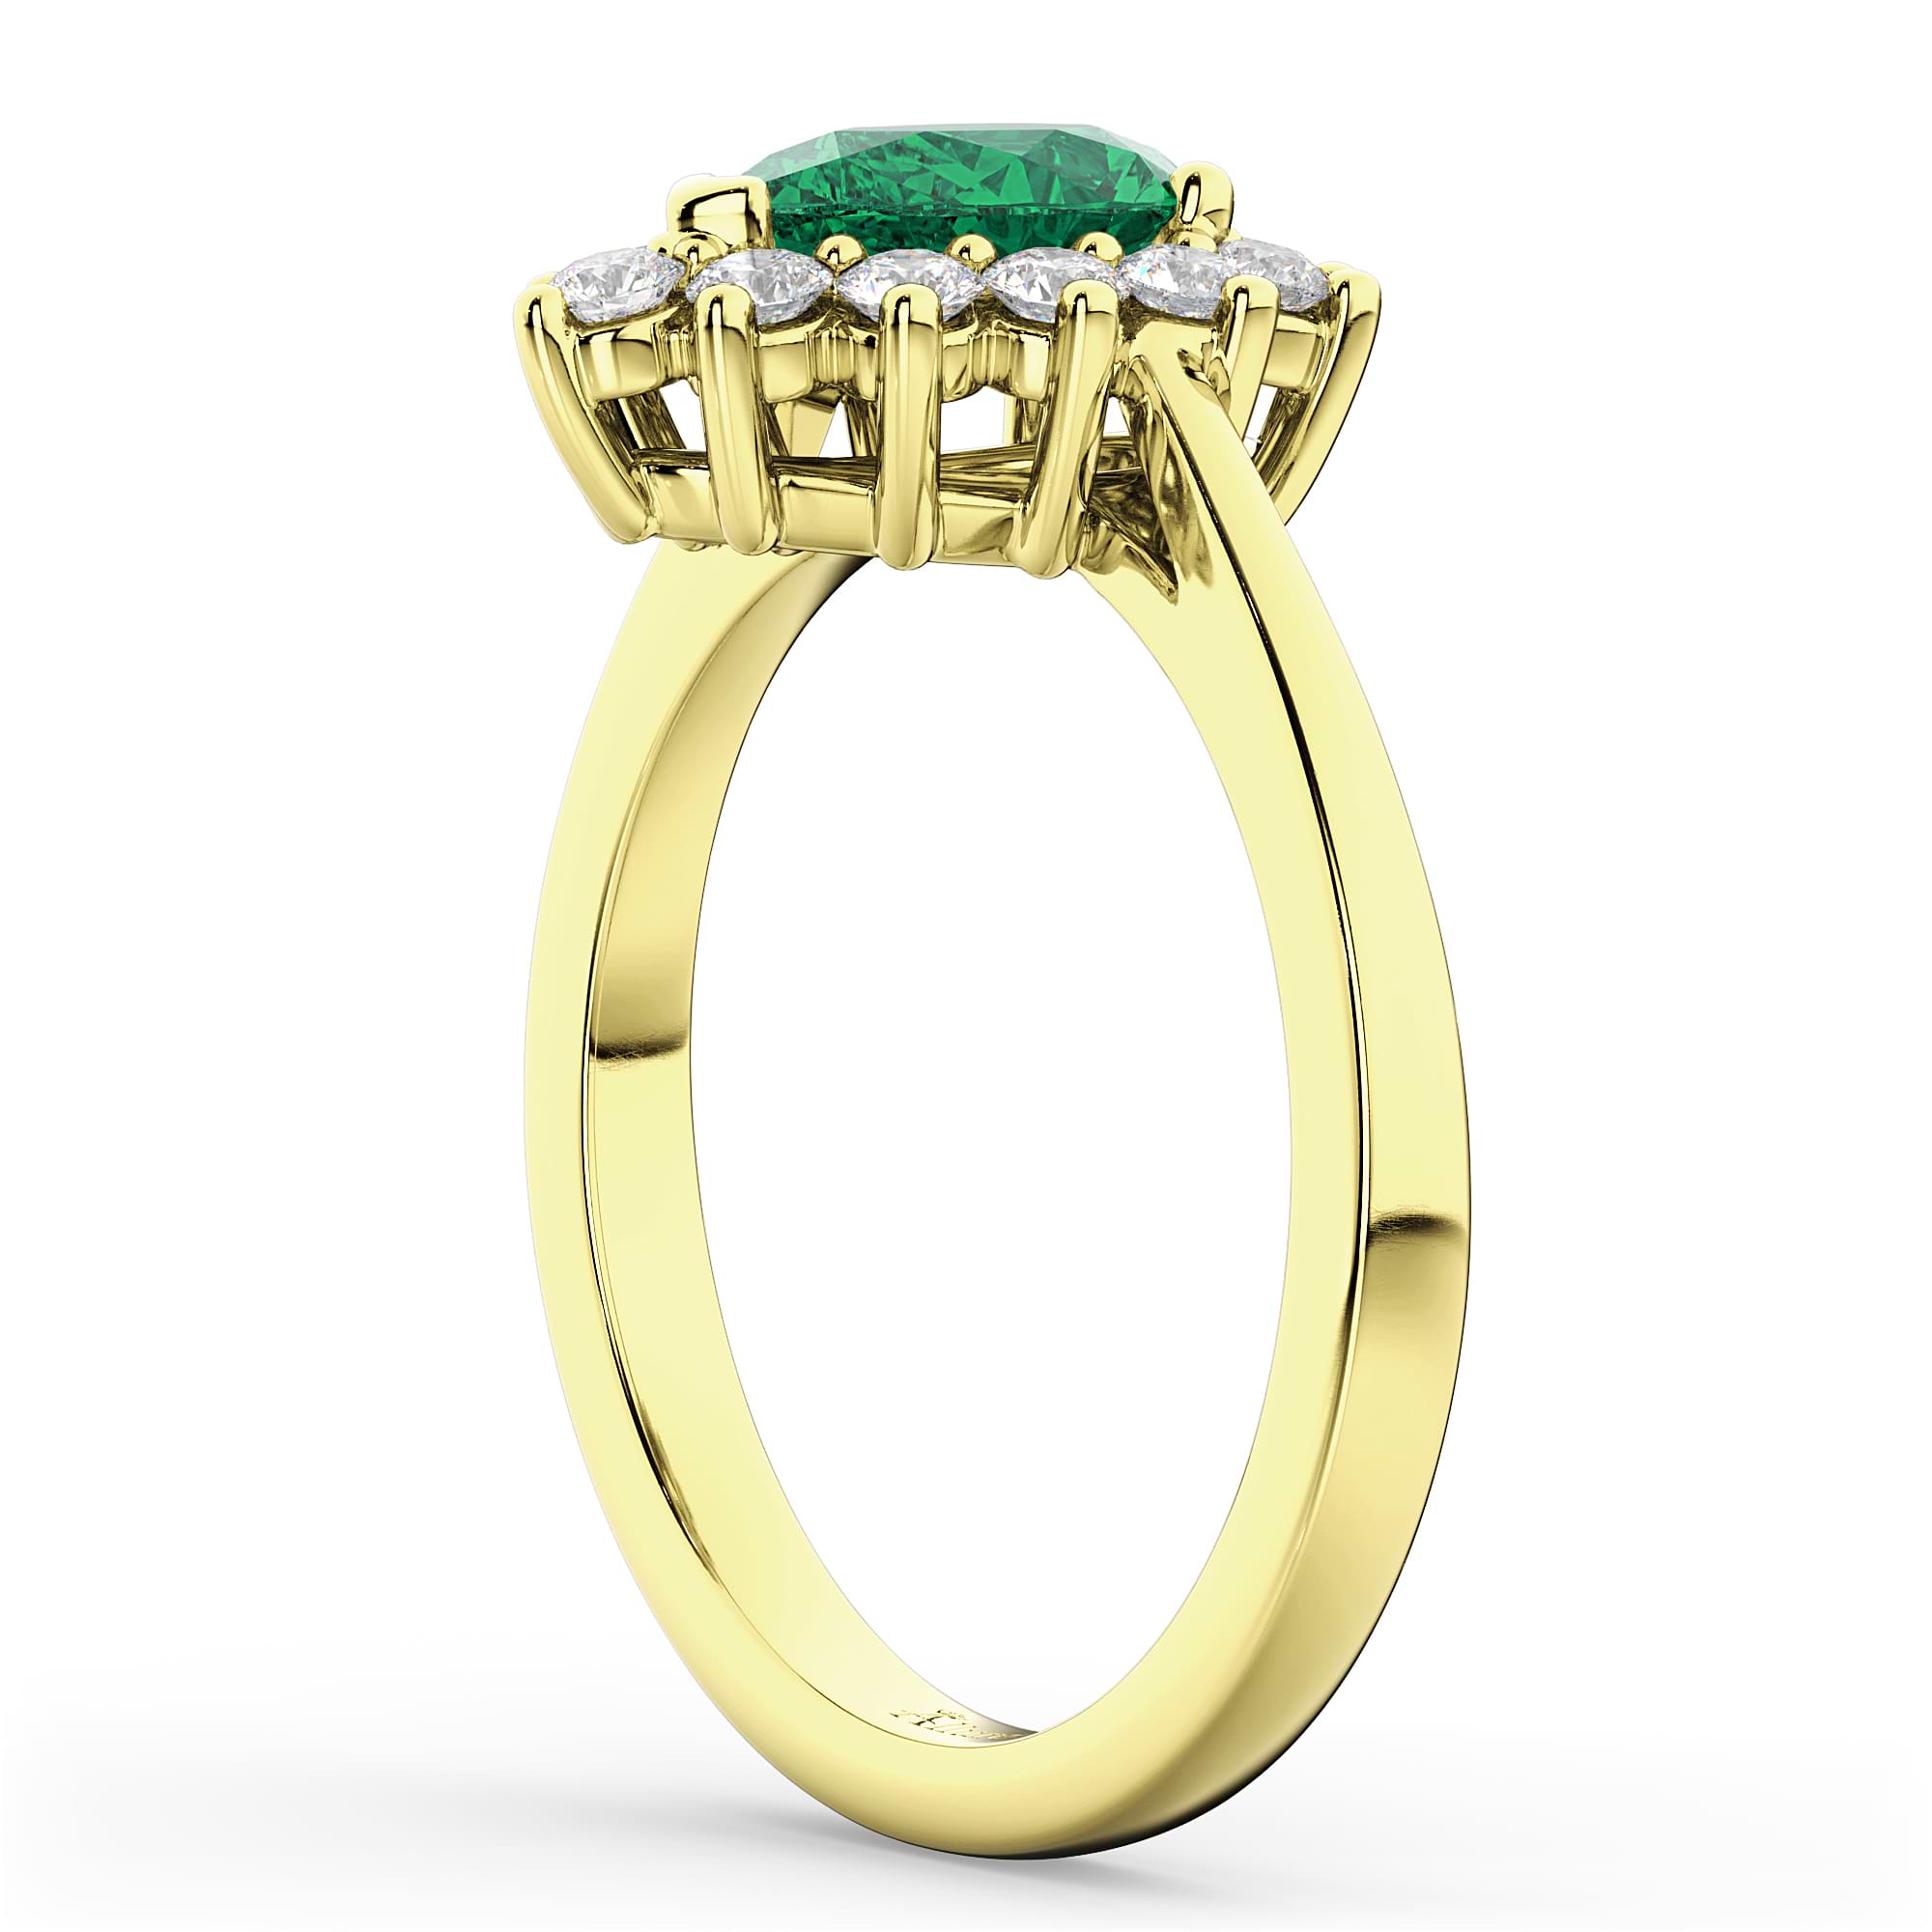 Halo Emerald & Diamond Floral Pear Shaped Fashion Ring 14k Yellow Gold (1.12ct)